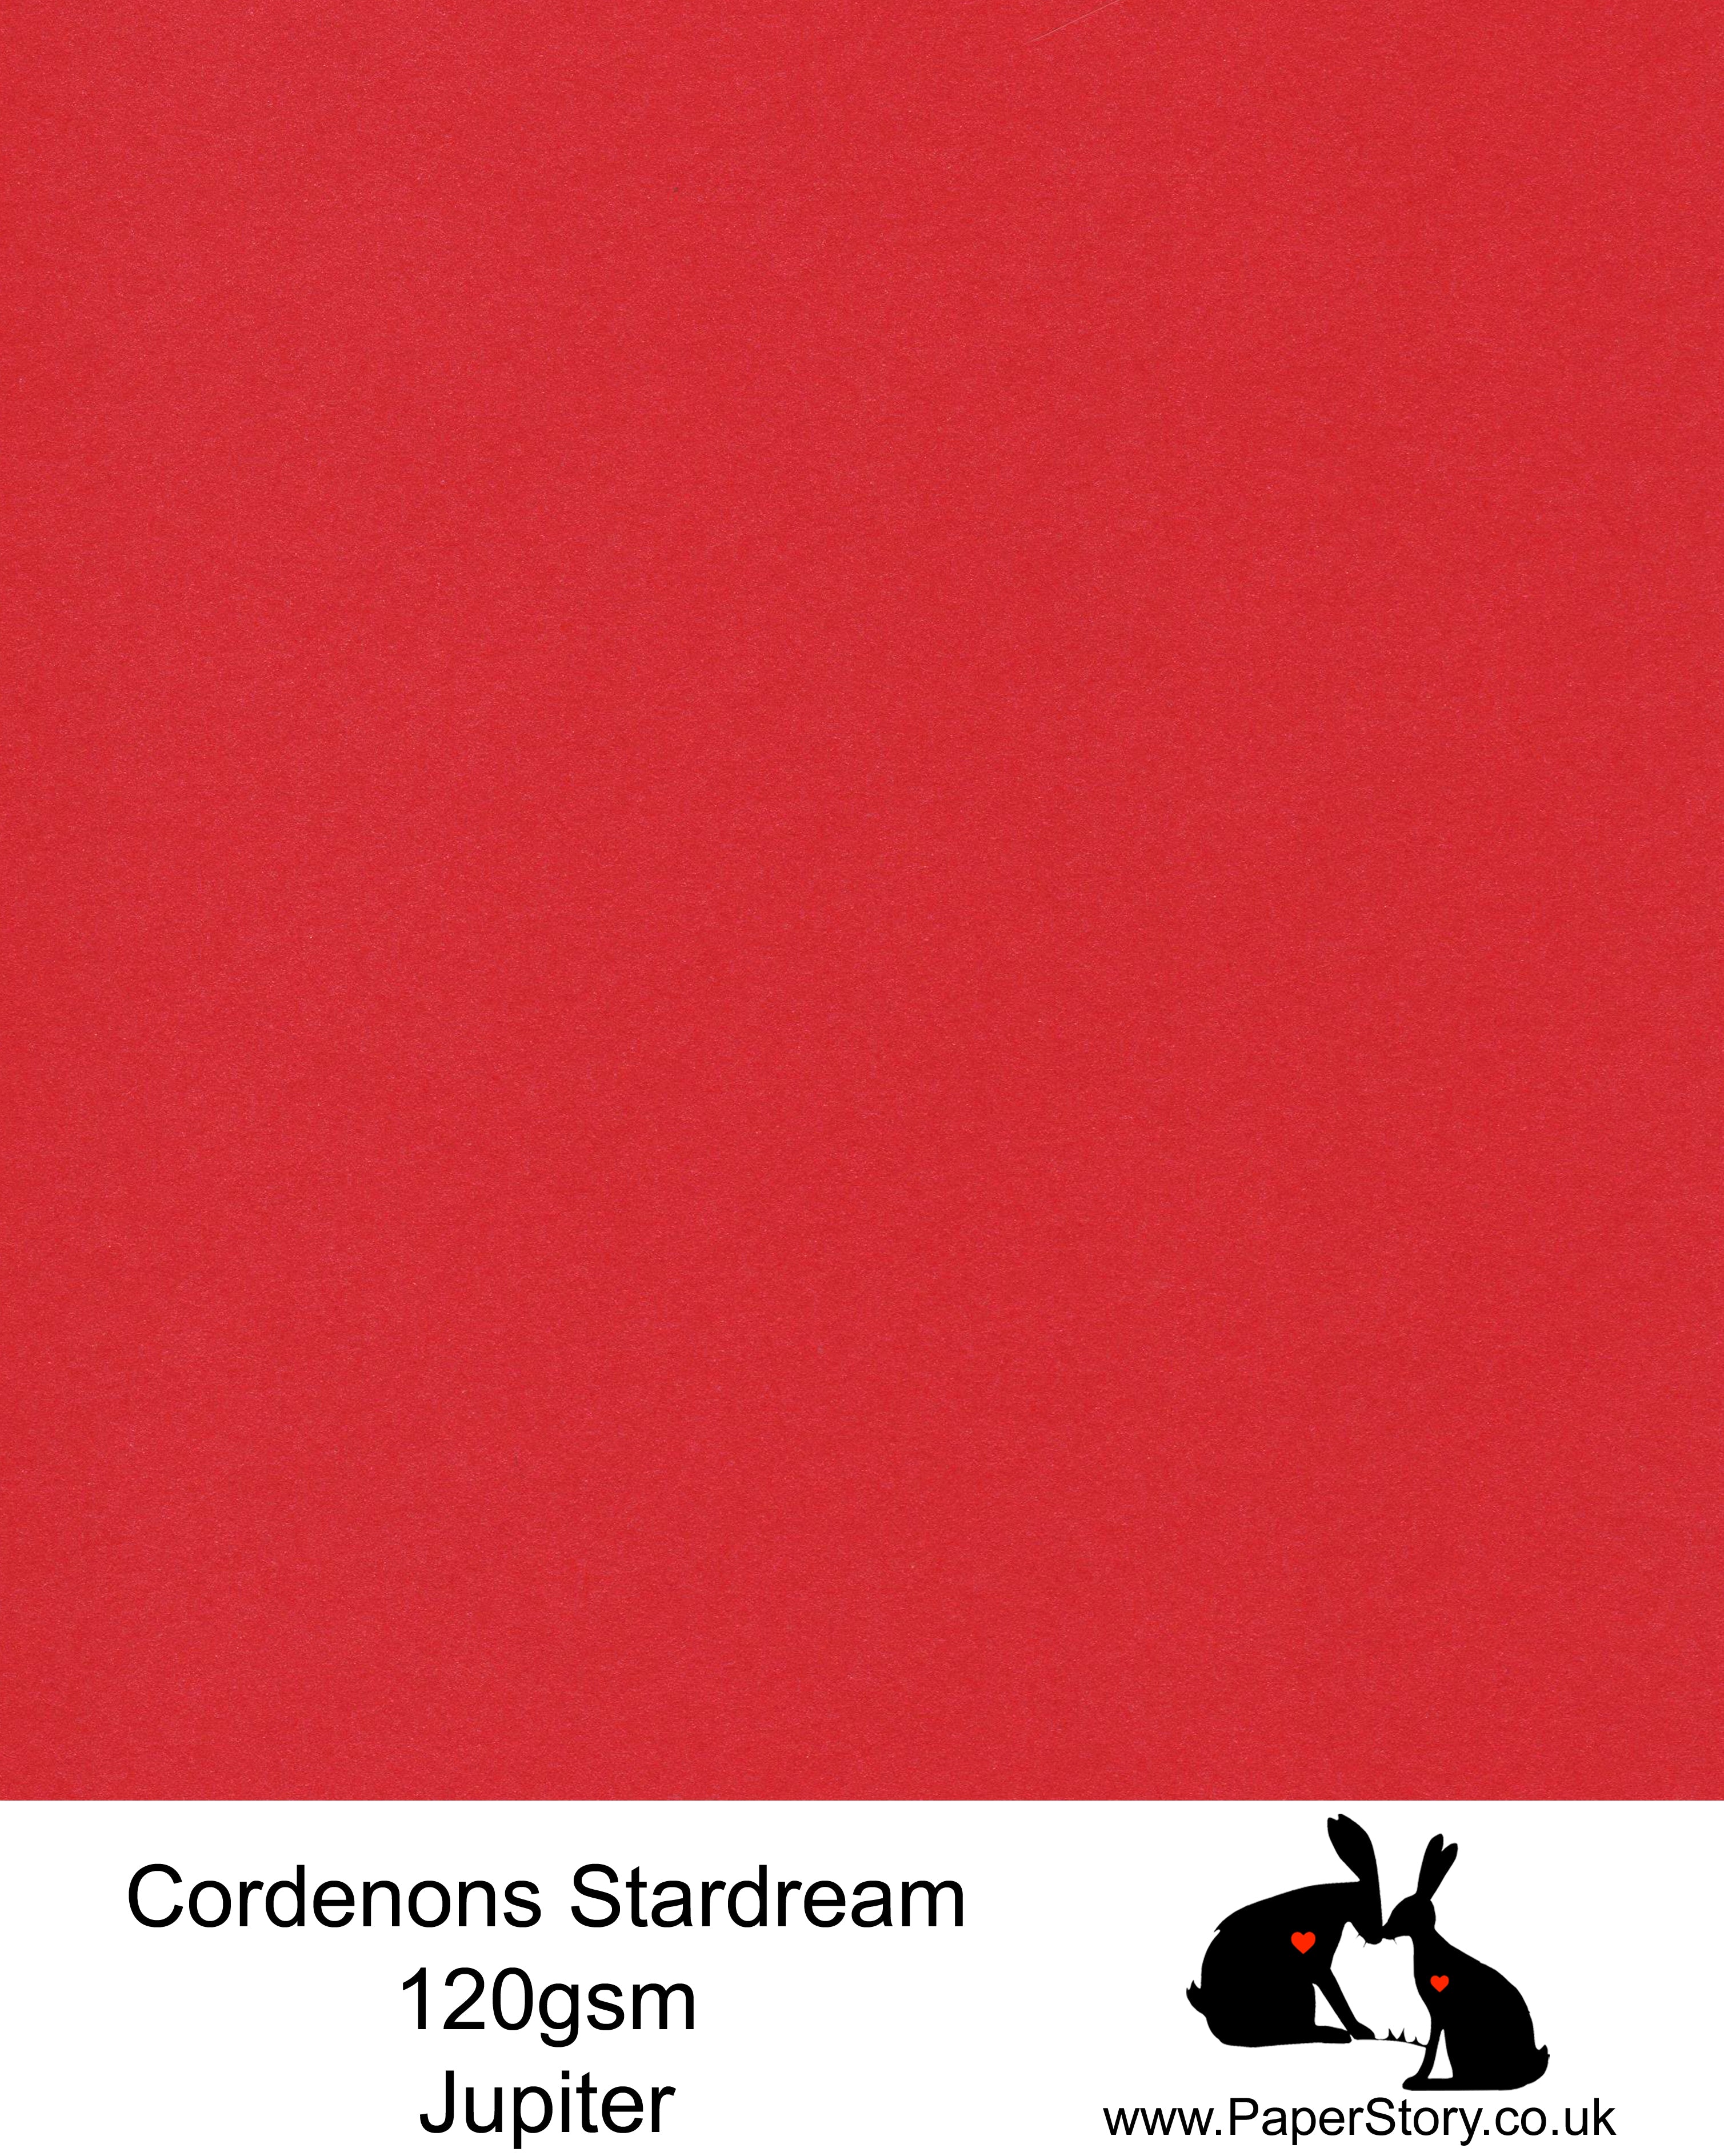 A4 Stardream 120gsm paper for Papercutting, craft, flower making  and wedding stationery. Jupiter is a vibrant bright red  Stardream is a luxury Italian paper from Italy, it is a double sided quality Pearlescent paper with a matching colour core. FSC Certified, acid free, archival and PH Neutral